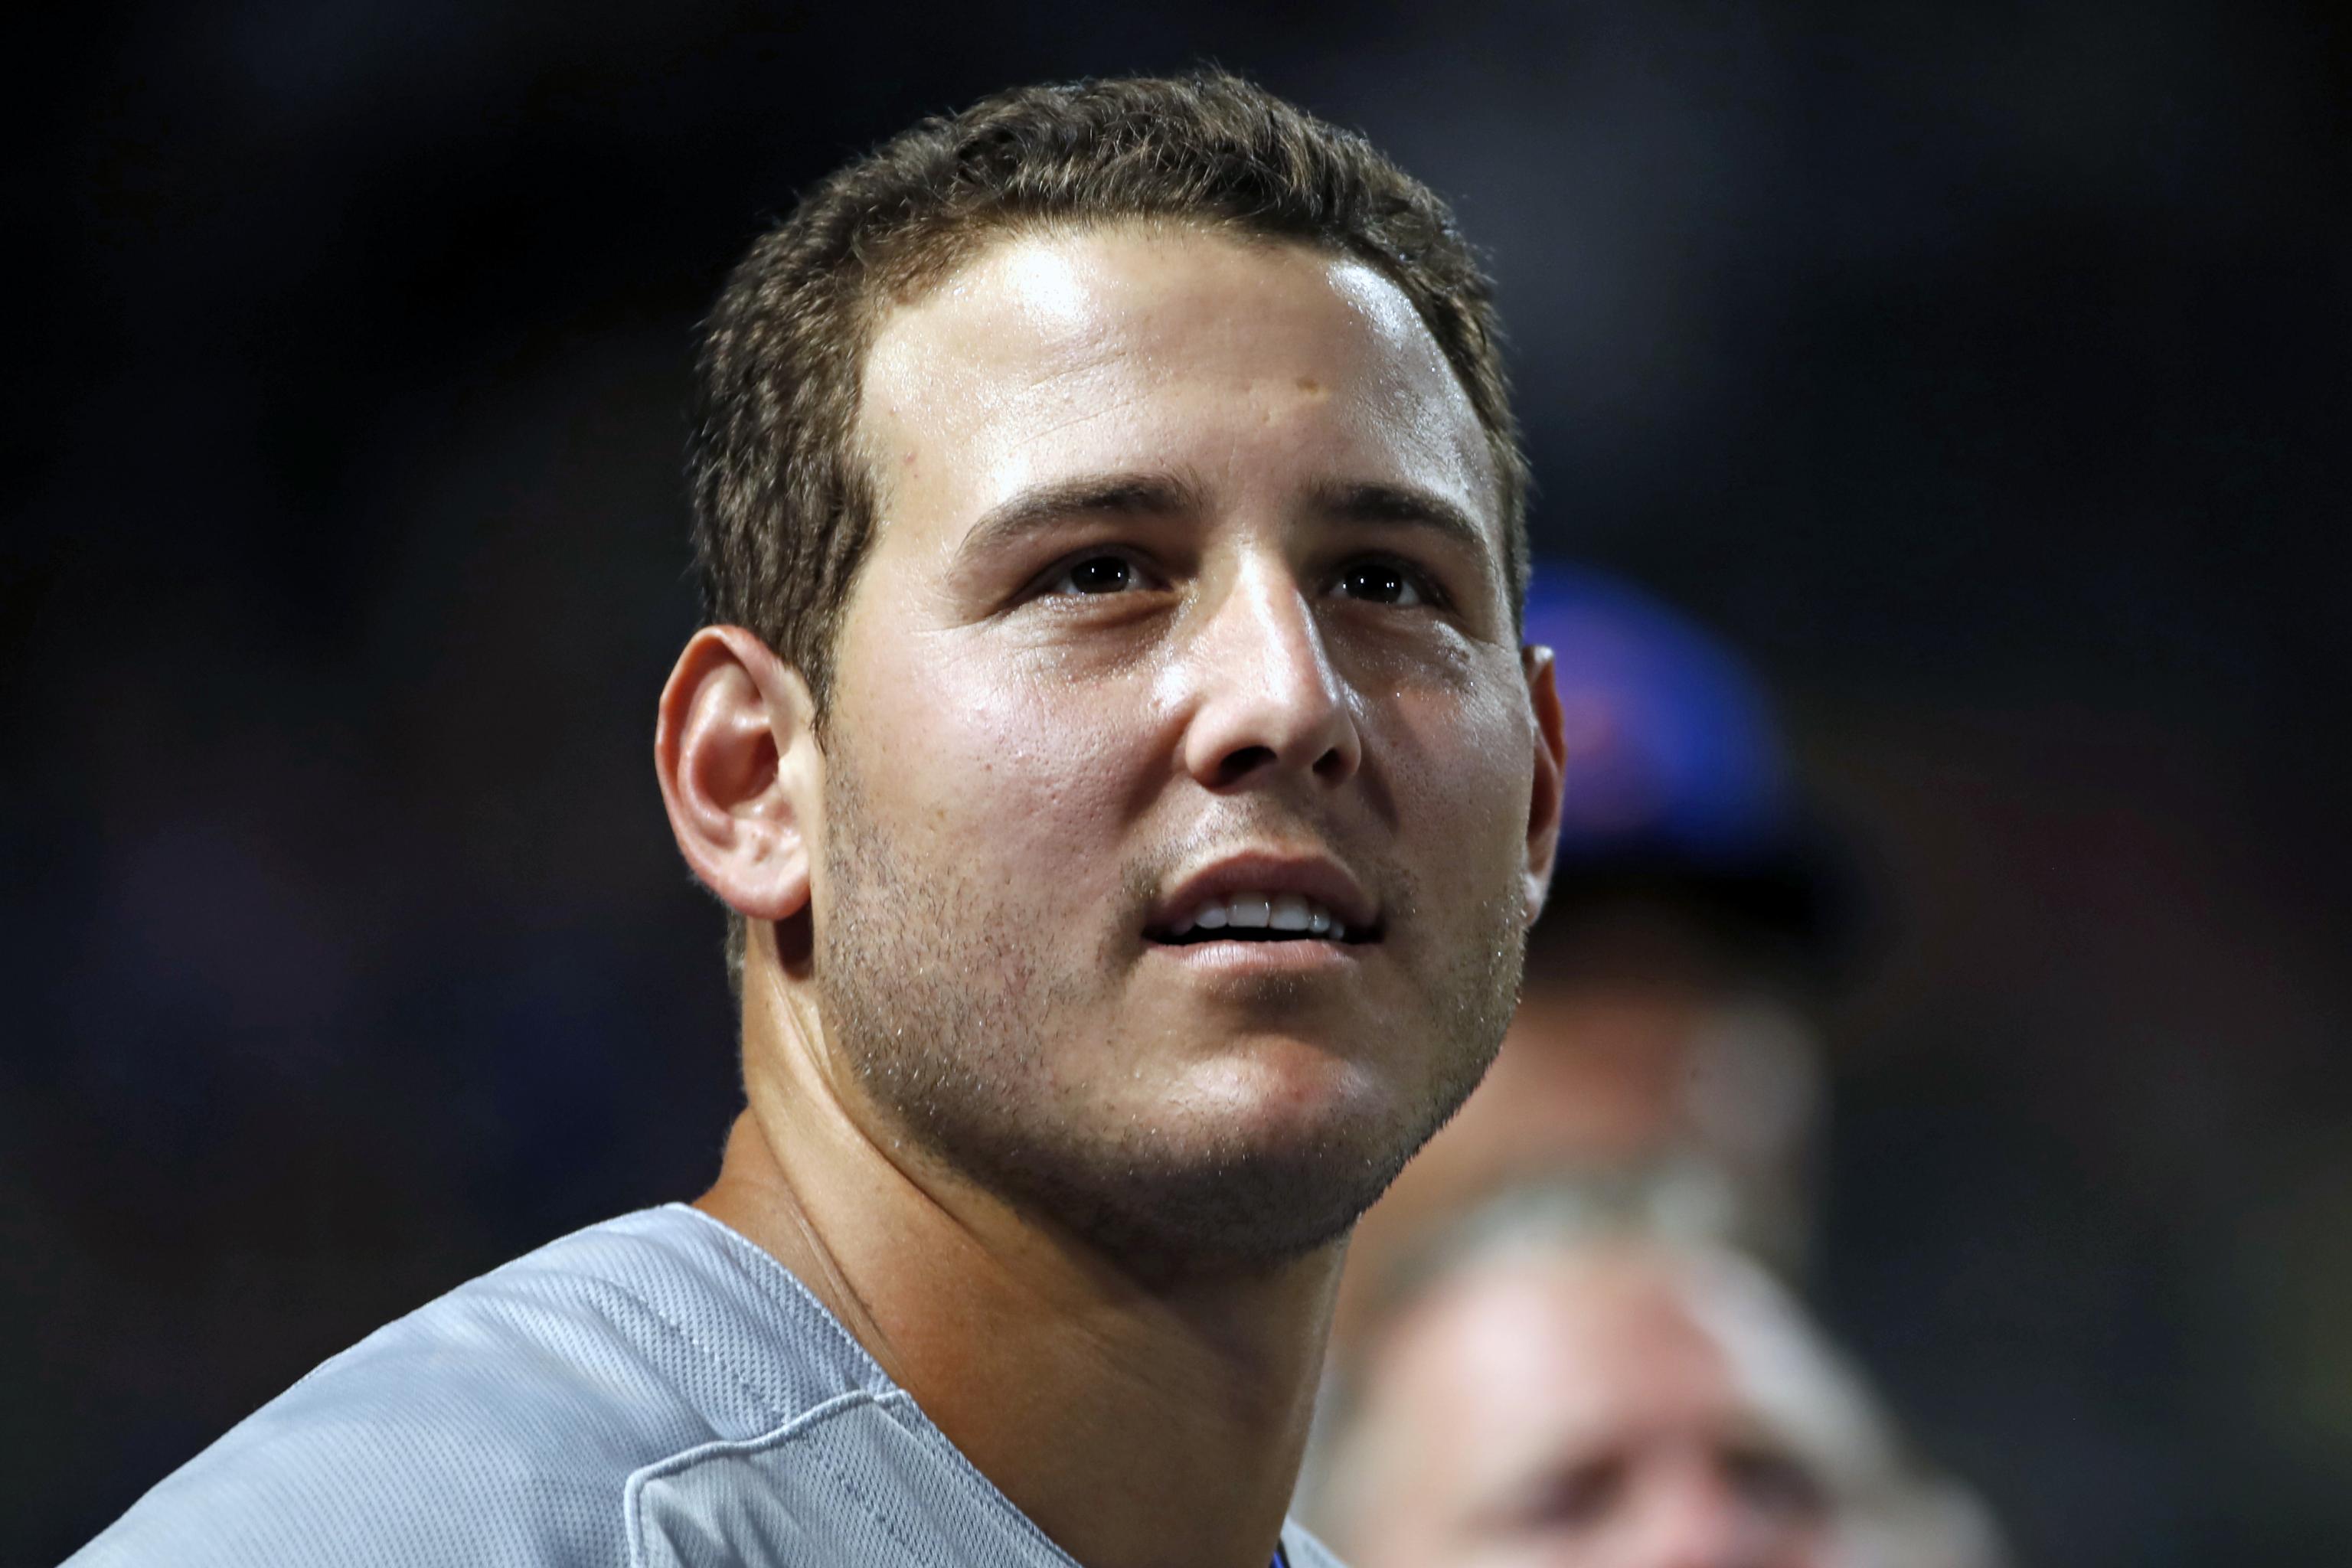 Cubs Player Anthony Rizzo Gives Hand Sanitizer to Opponent During Game